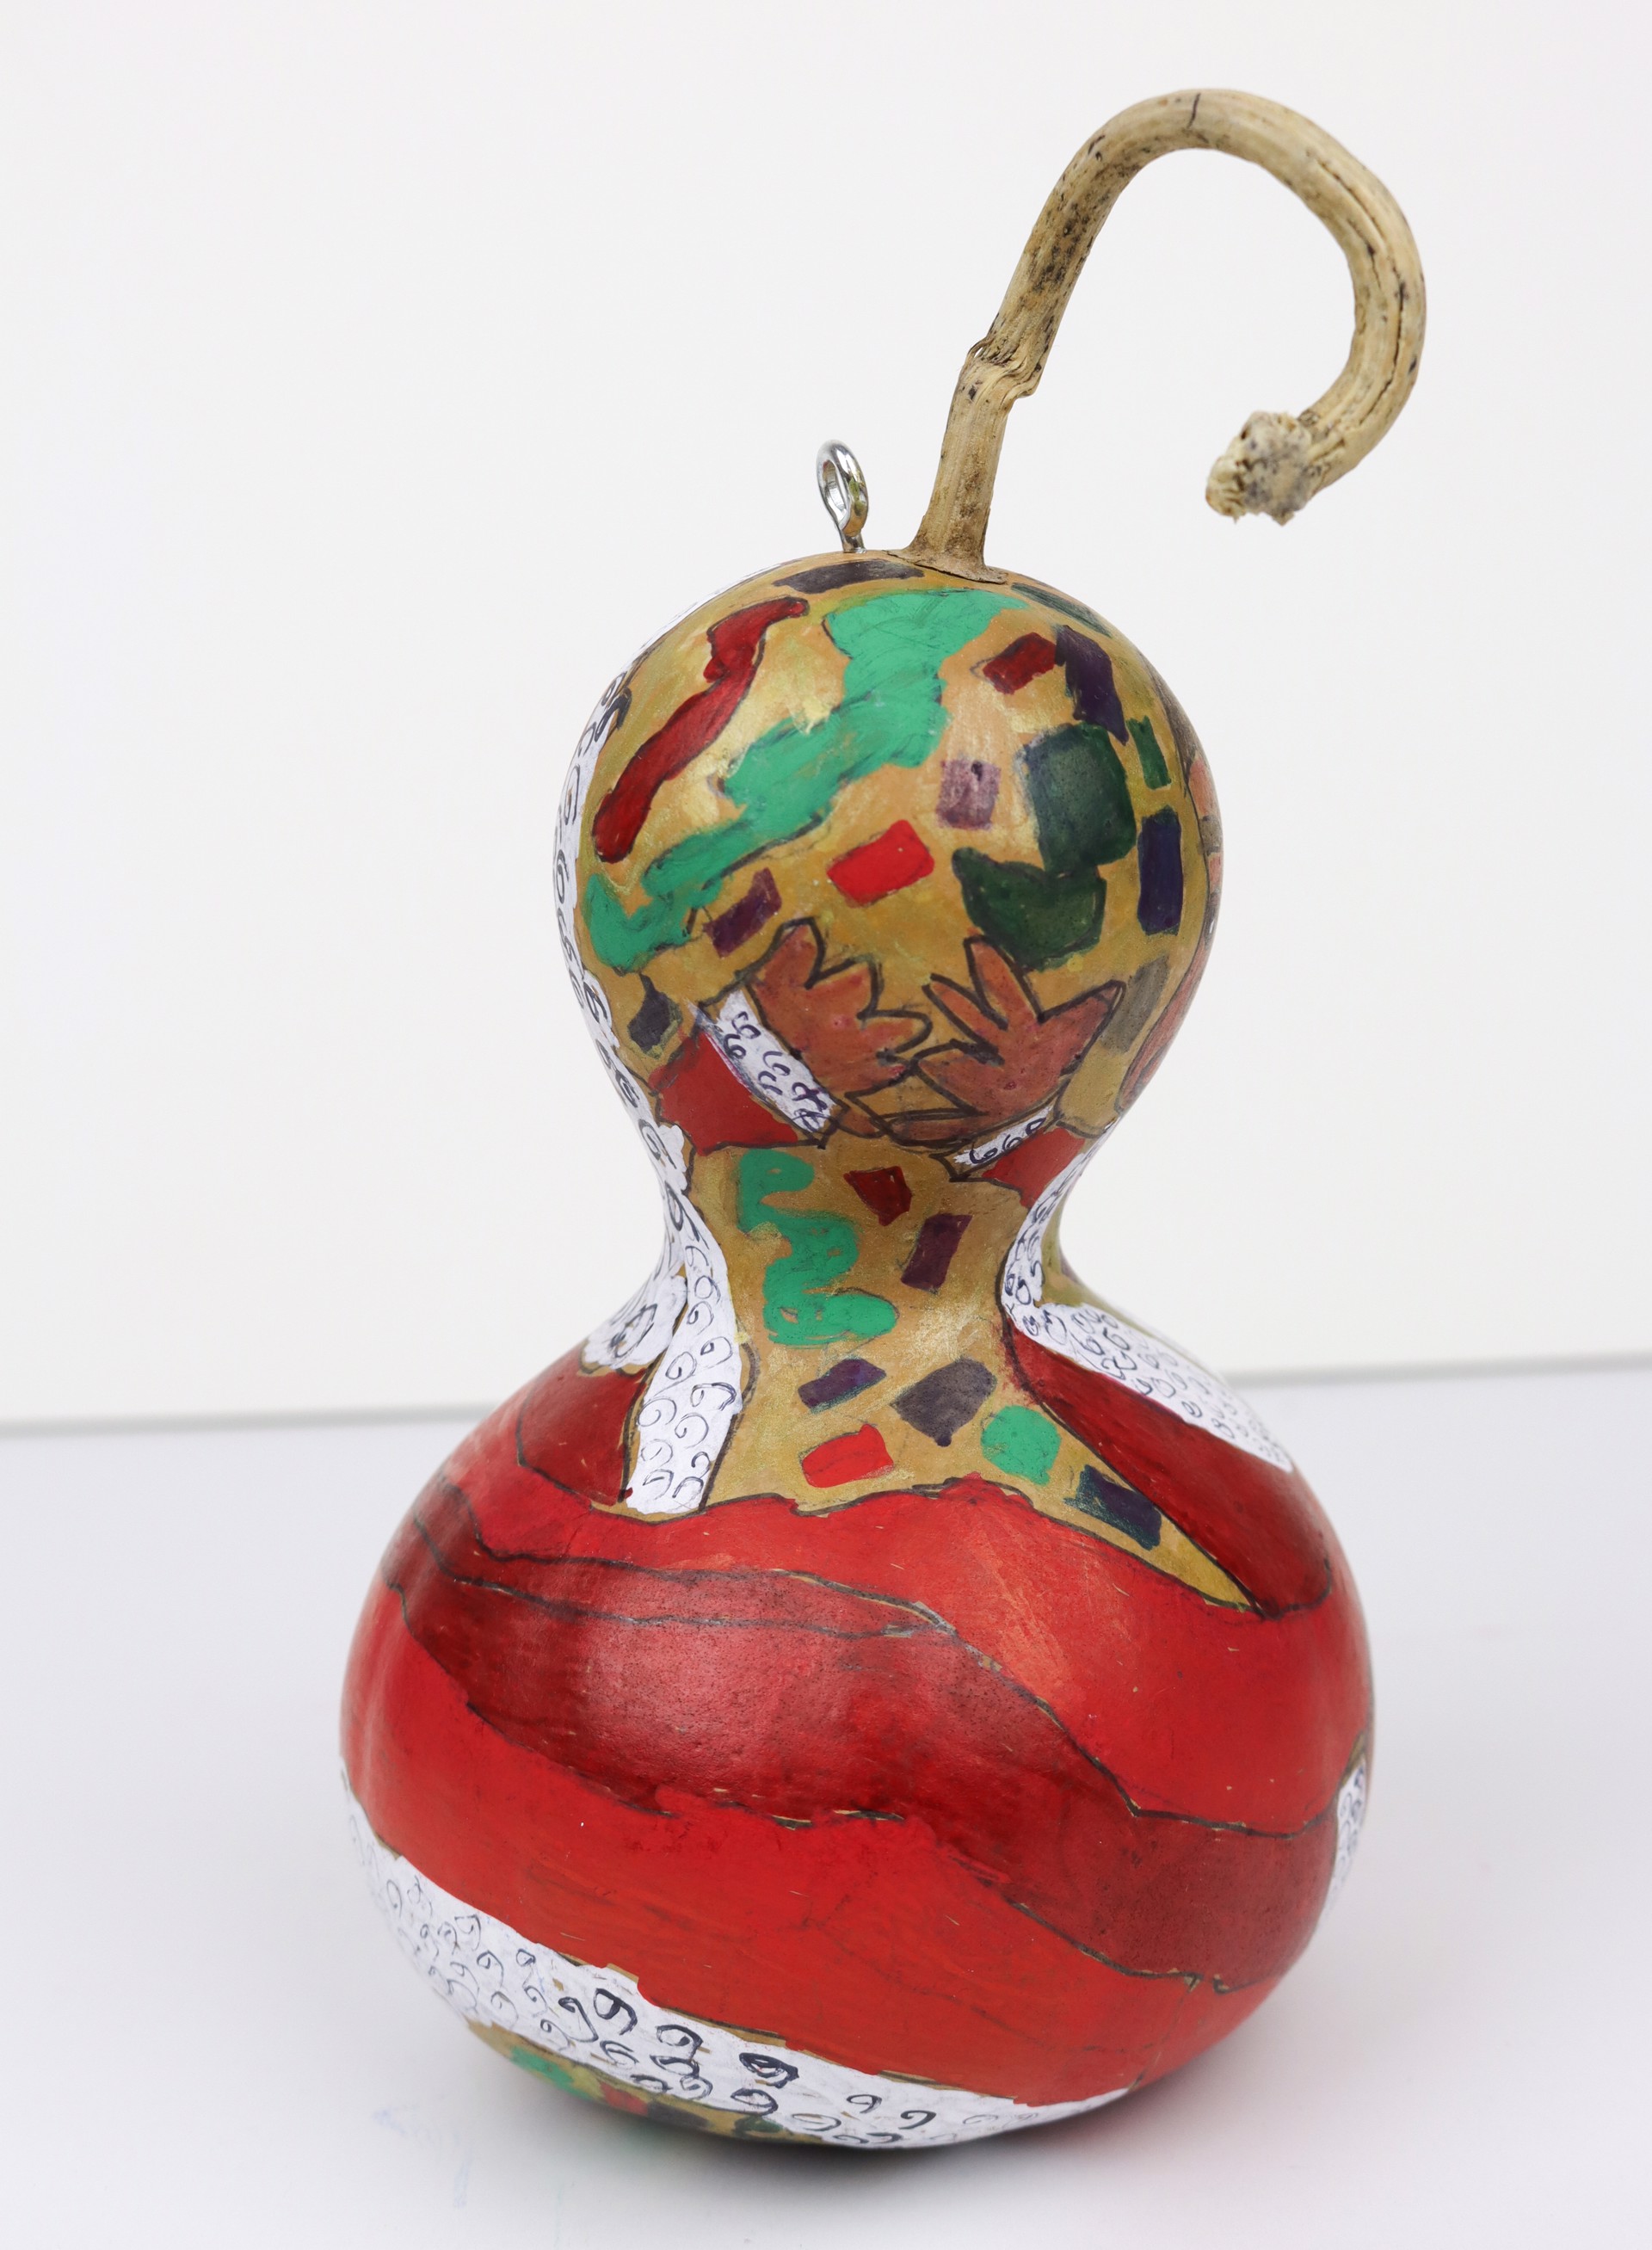 Clause Love (gourd ornament) by Vanessa Monroe